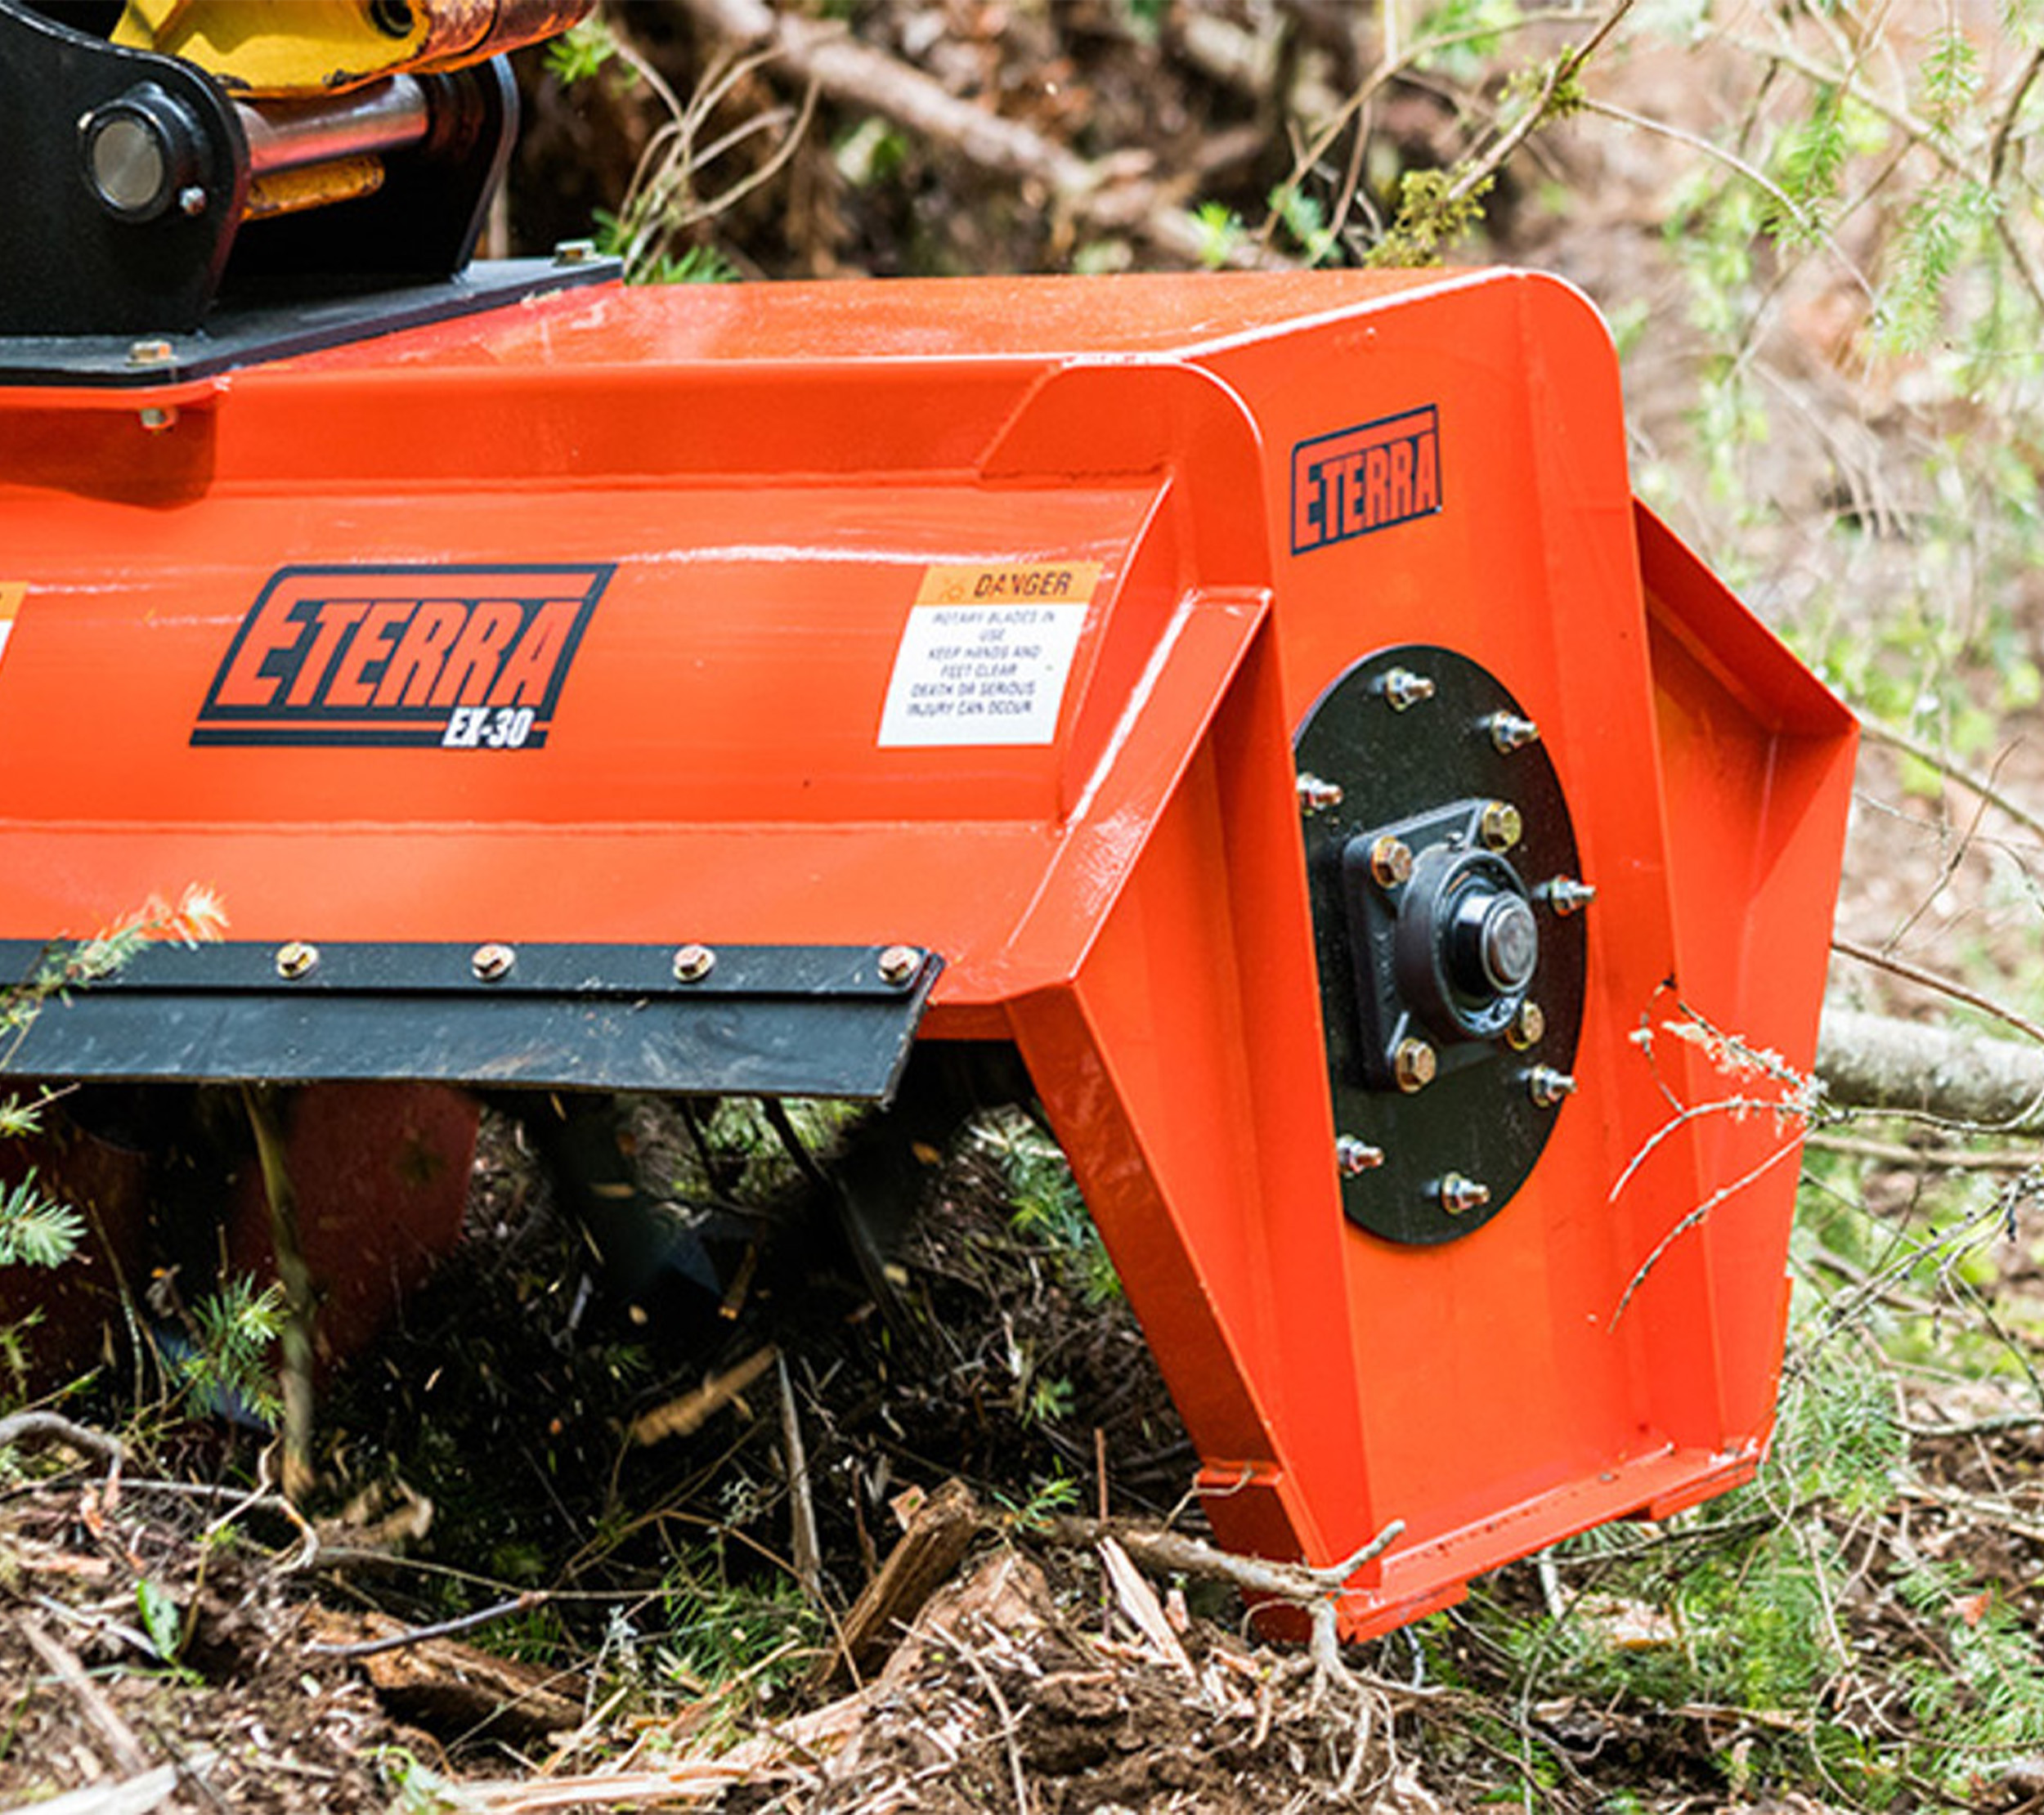 closeup shot of the eterra ex-30 excavator flail mower with the blades